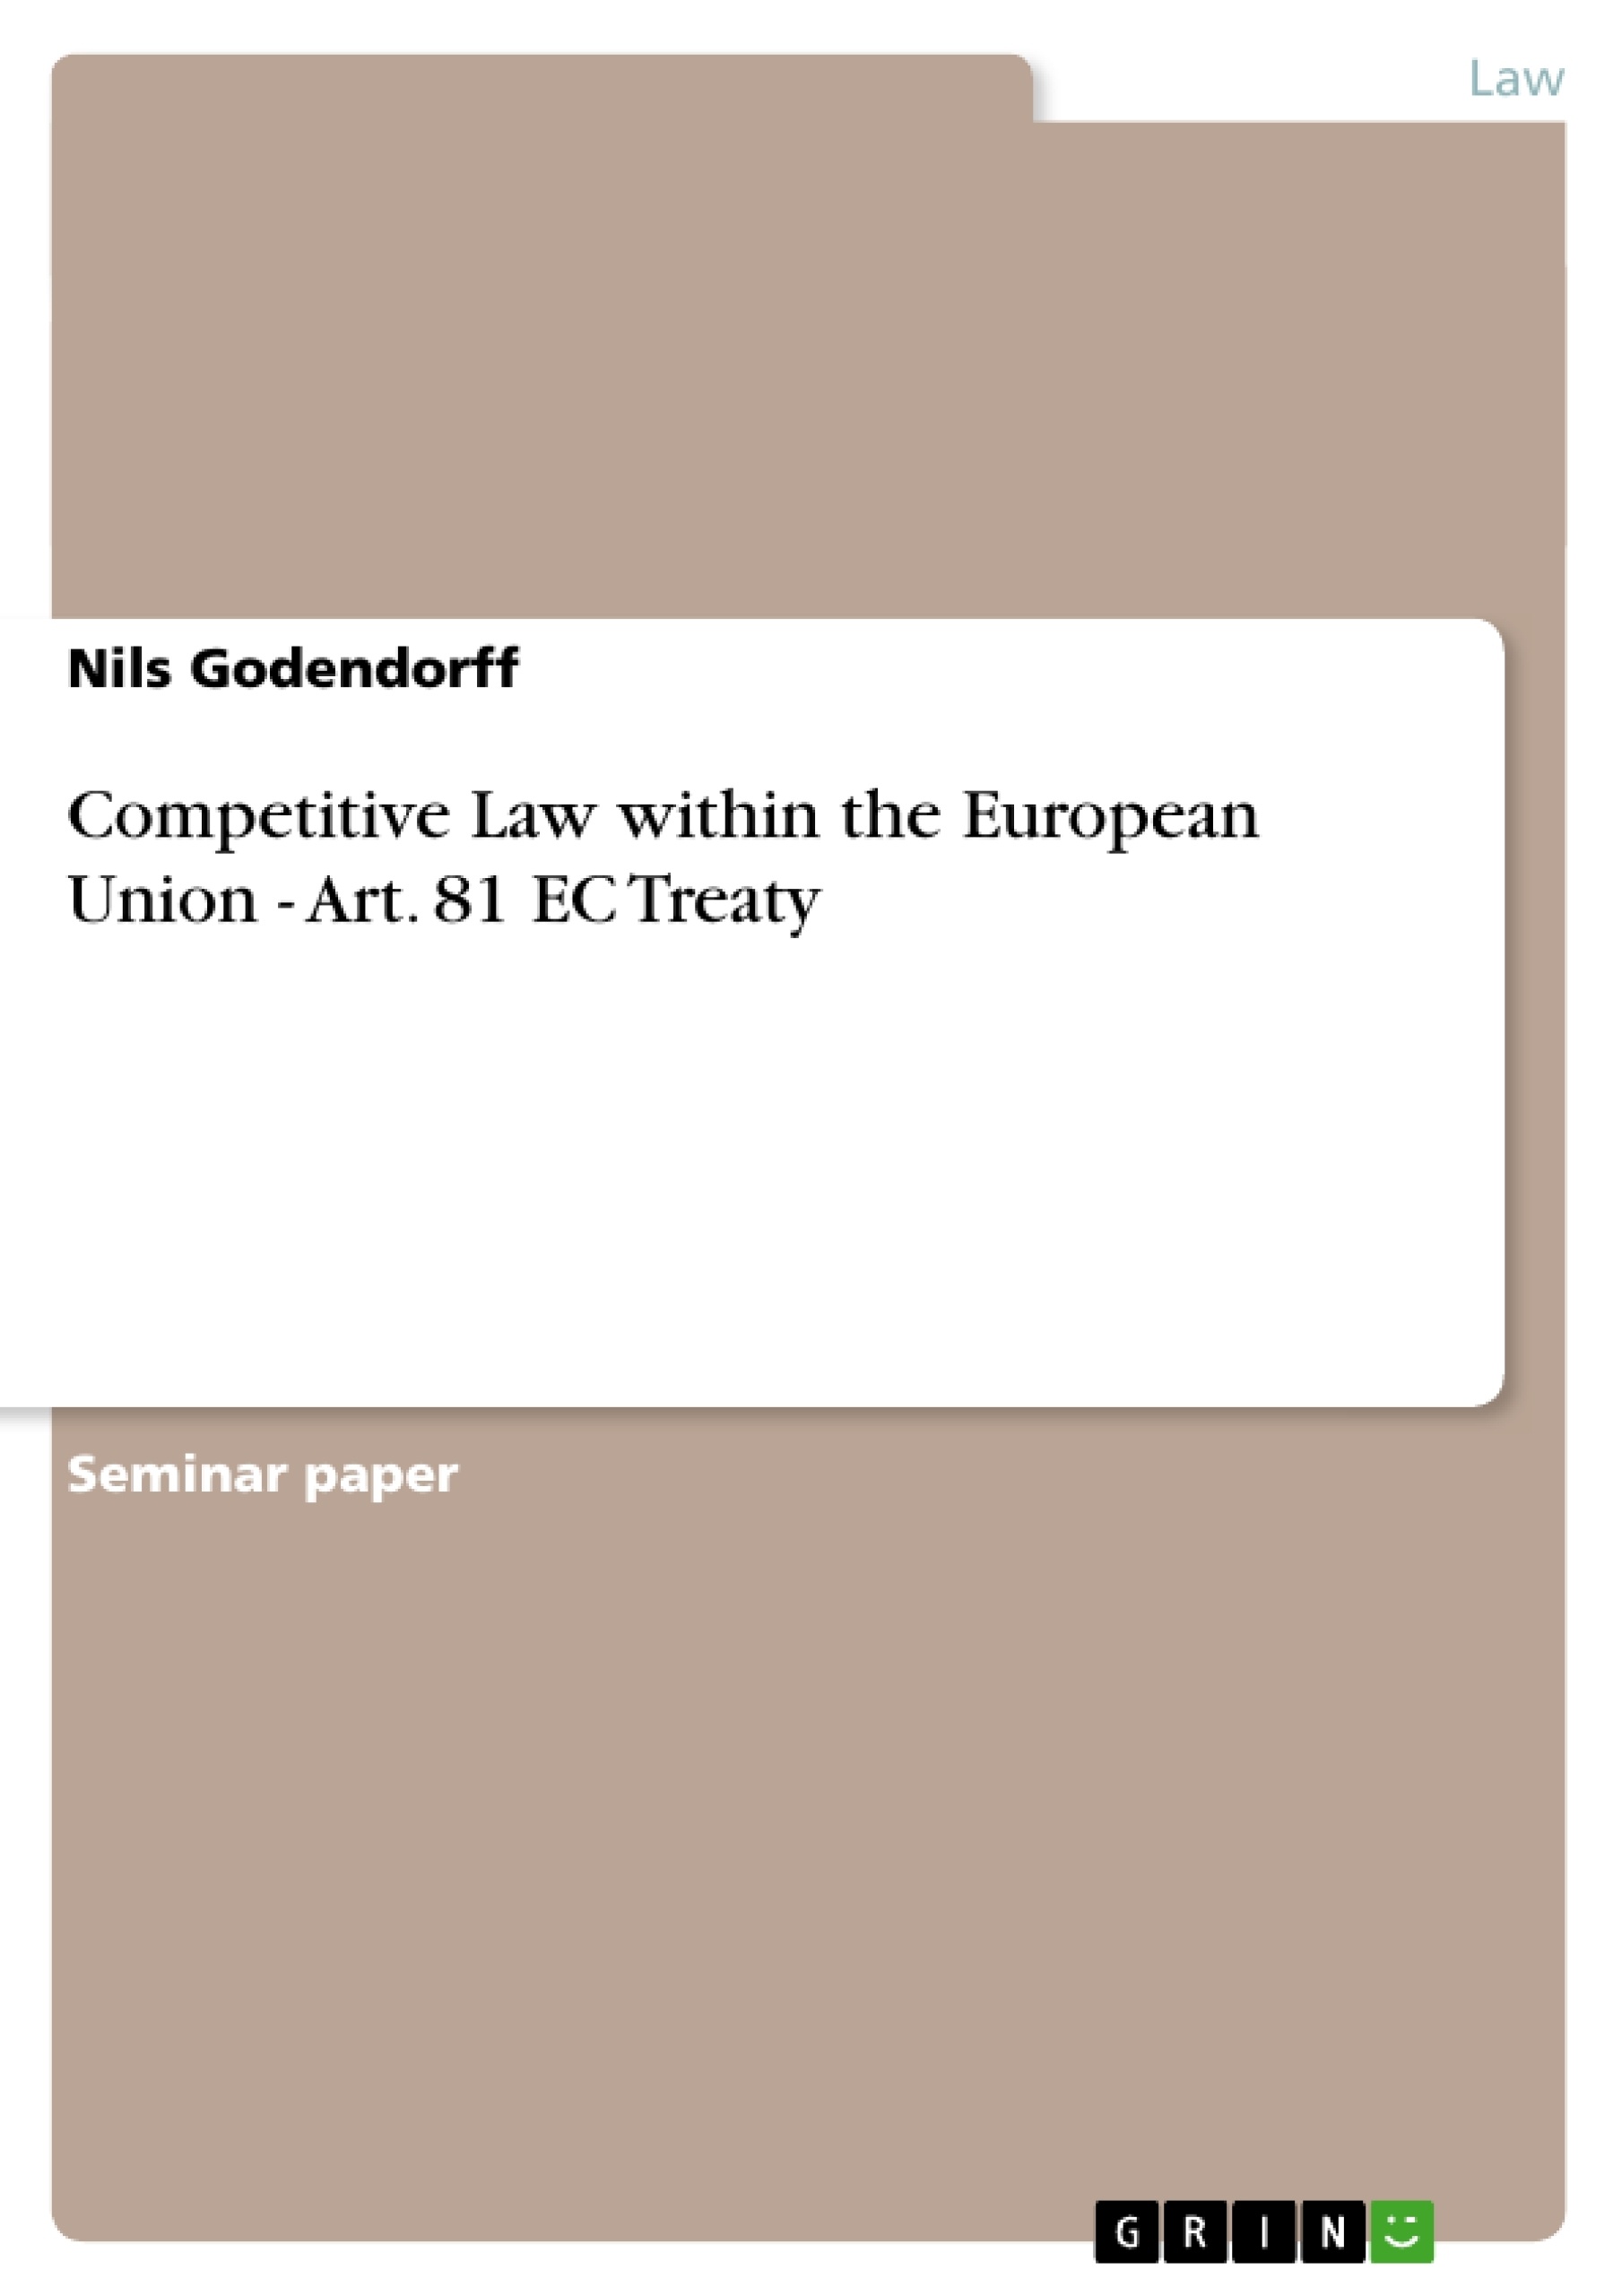 Título: Competitive Law within the European Union - Art. 81 EC Treaty